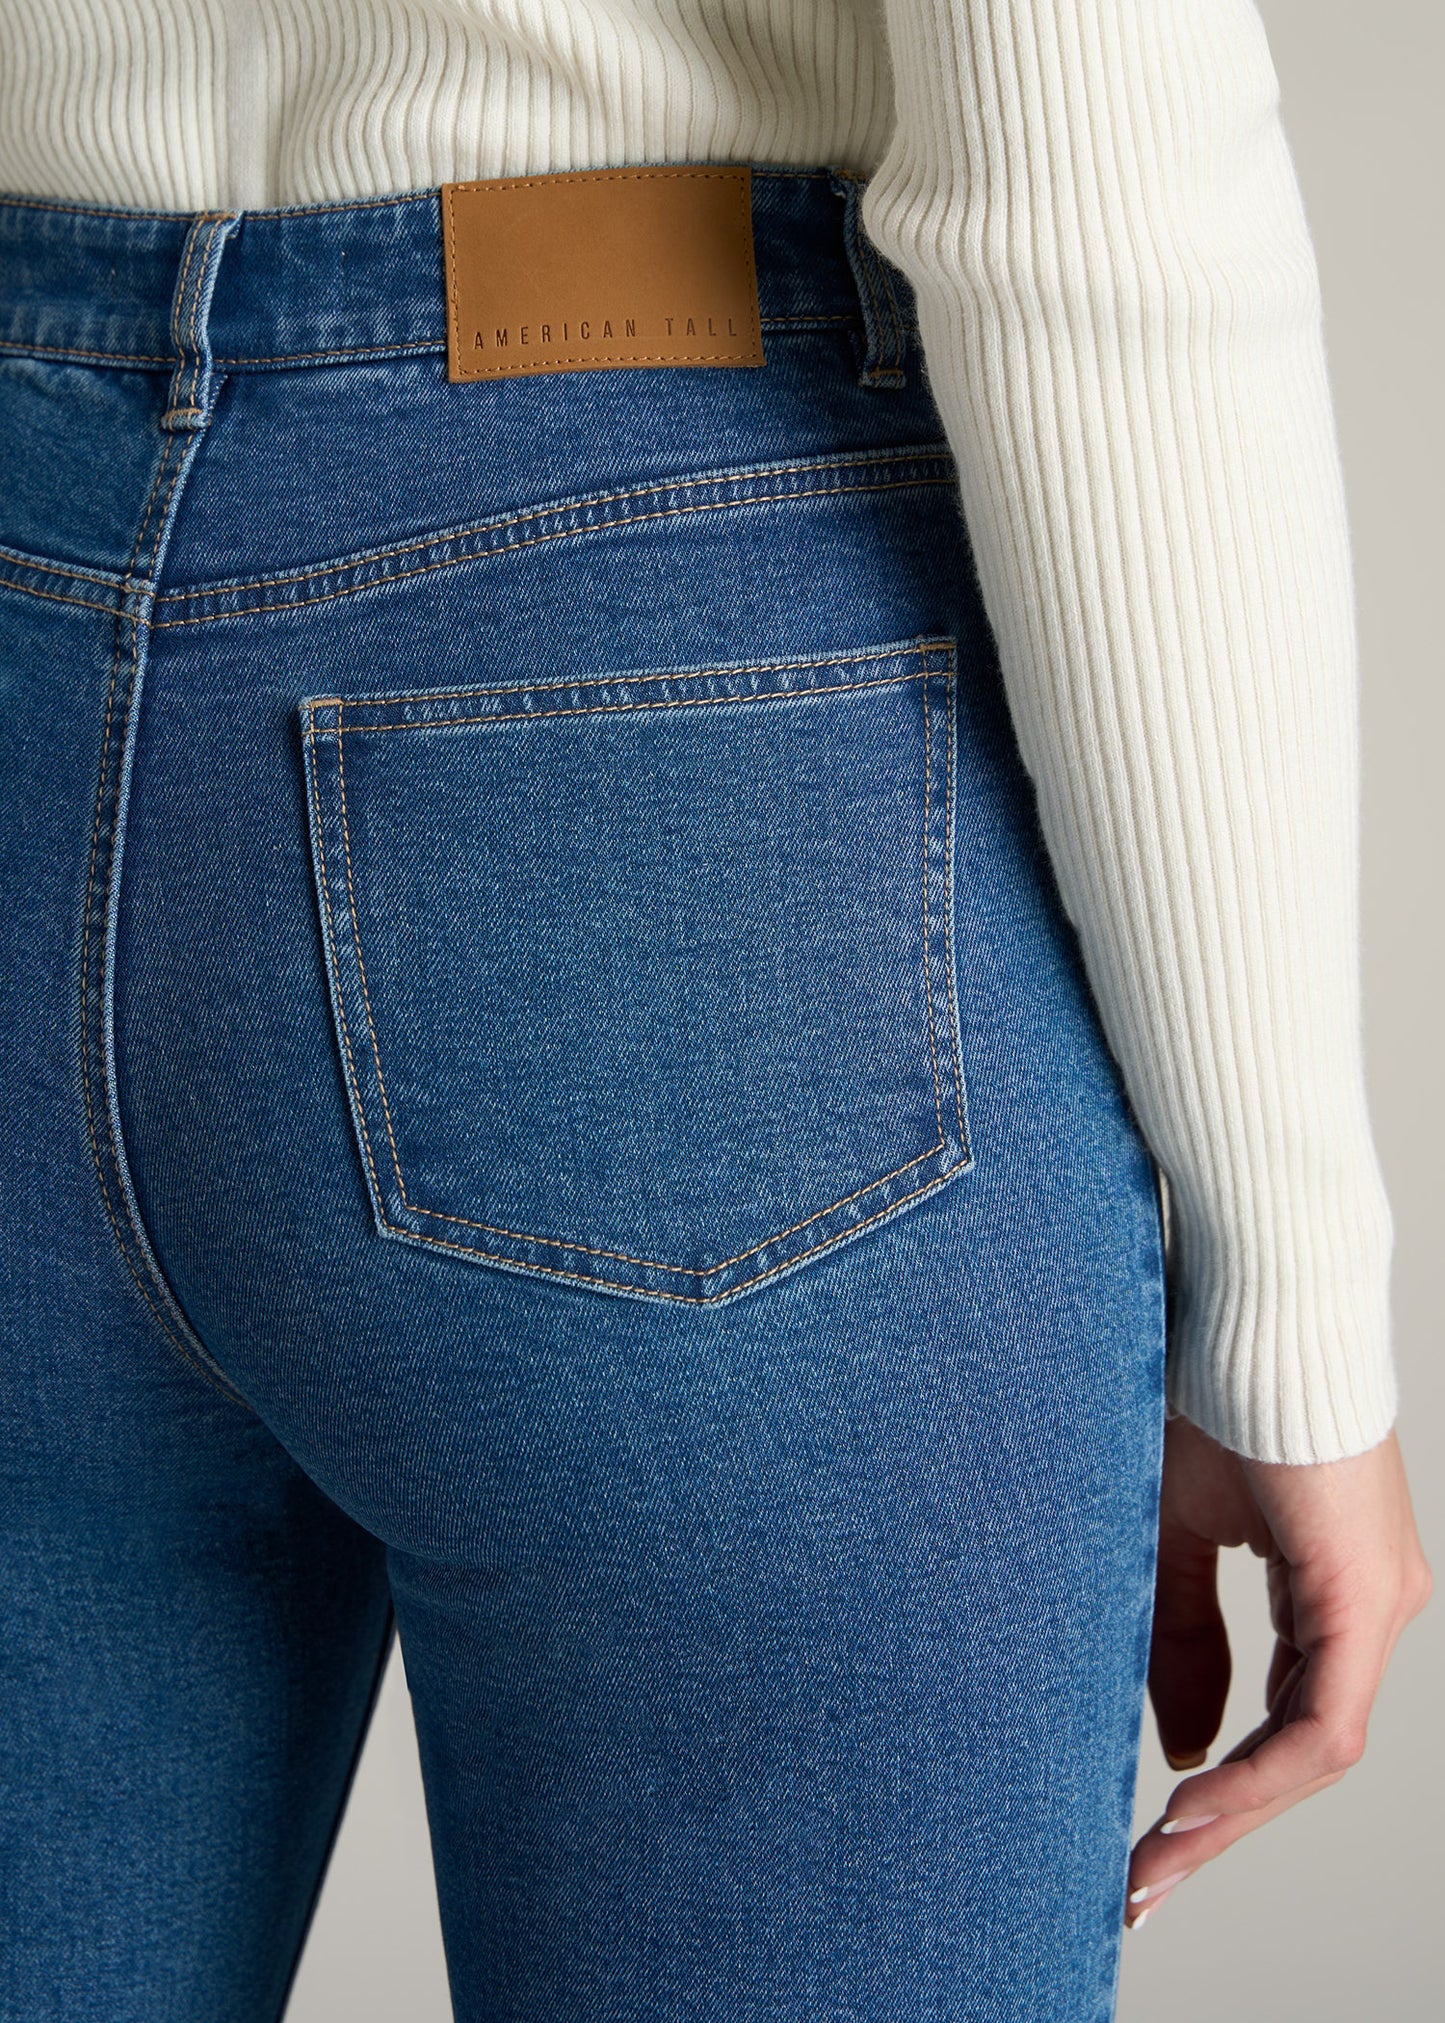     American-Tall-Women-Britney-Bootcut-High-Waisted-Jeans-Washed-Medium-Indigo-detail